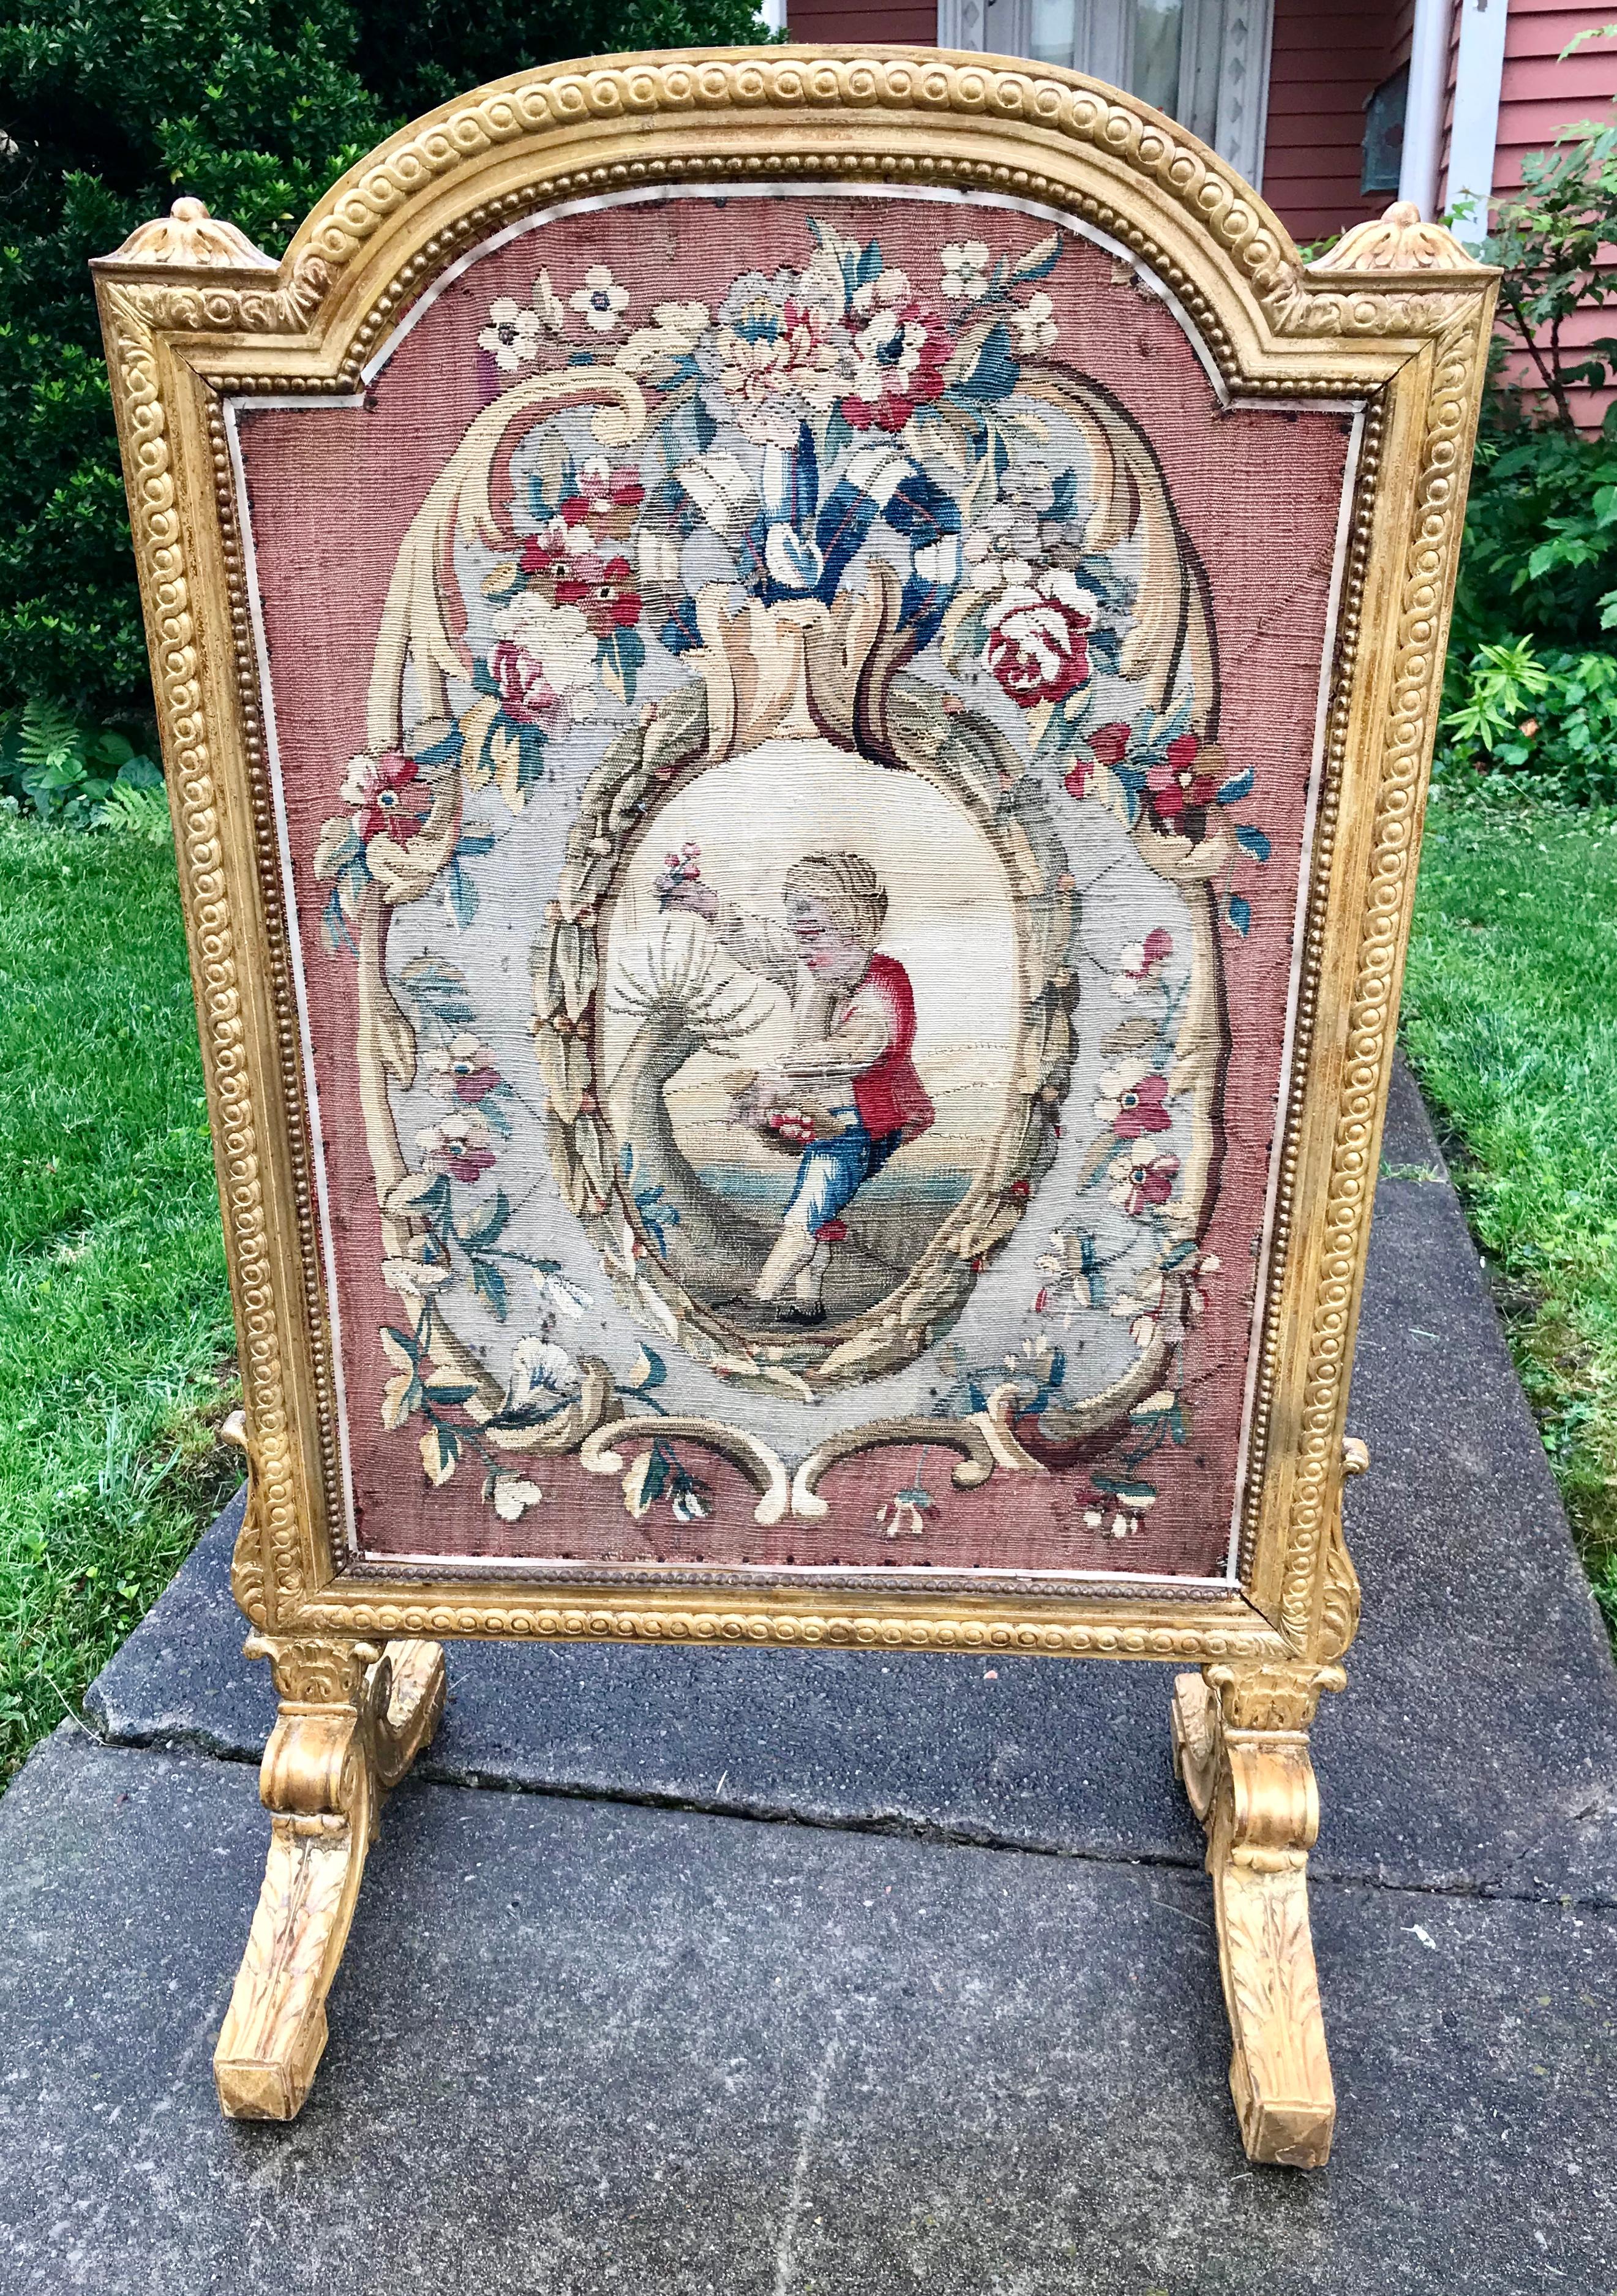 Tapestry, possibly Aubusson, probably 18th century fragment set in an 1830 carved giltwood frame. Boy picking flowers.

Back with Christies (Paris) sticker.Christies sold lot info with description and final sale price ( approx. $2049 in 2004 ).

The